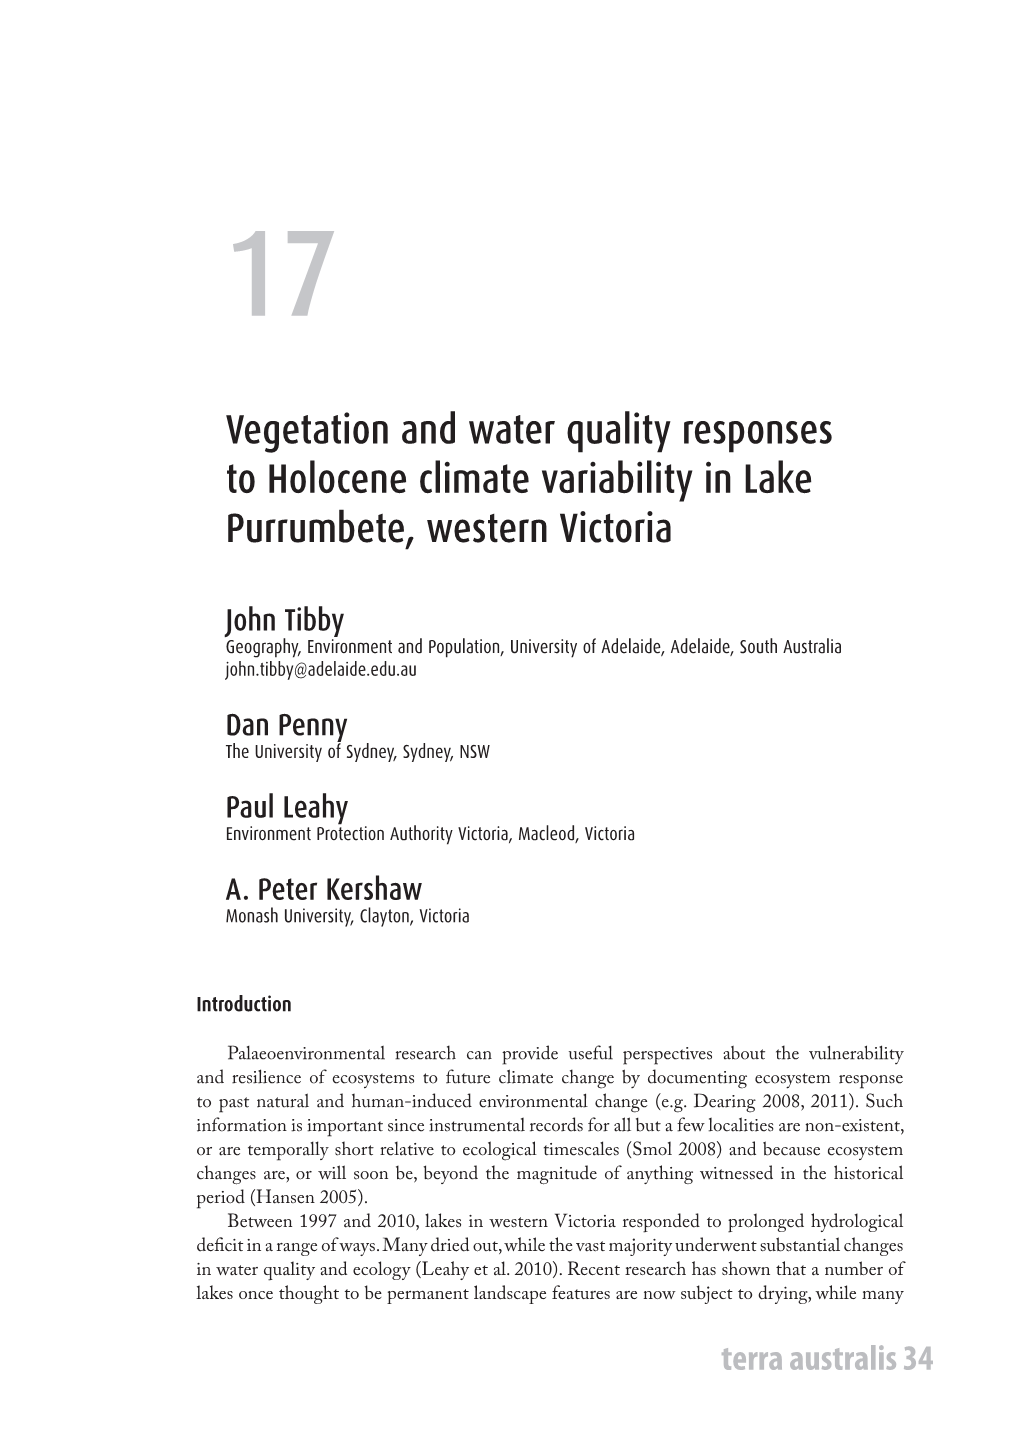 Vegetation and Water Quality Responses to Holocene Climate Variability in Lake Purrumbete, Western Victoria